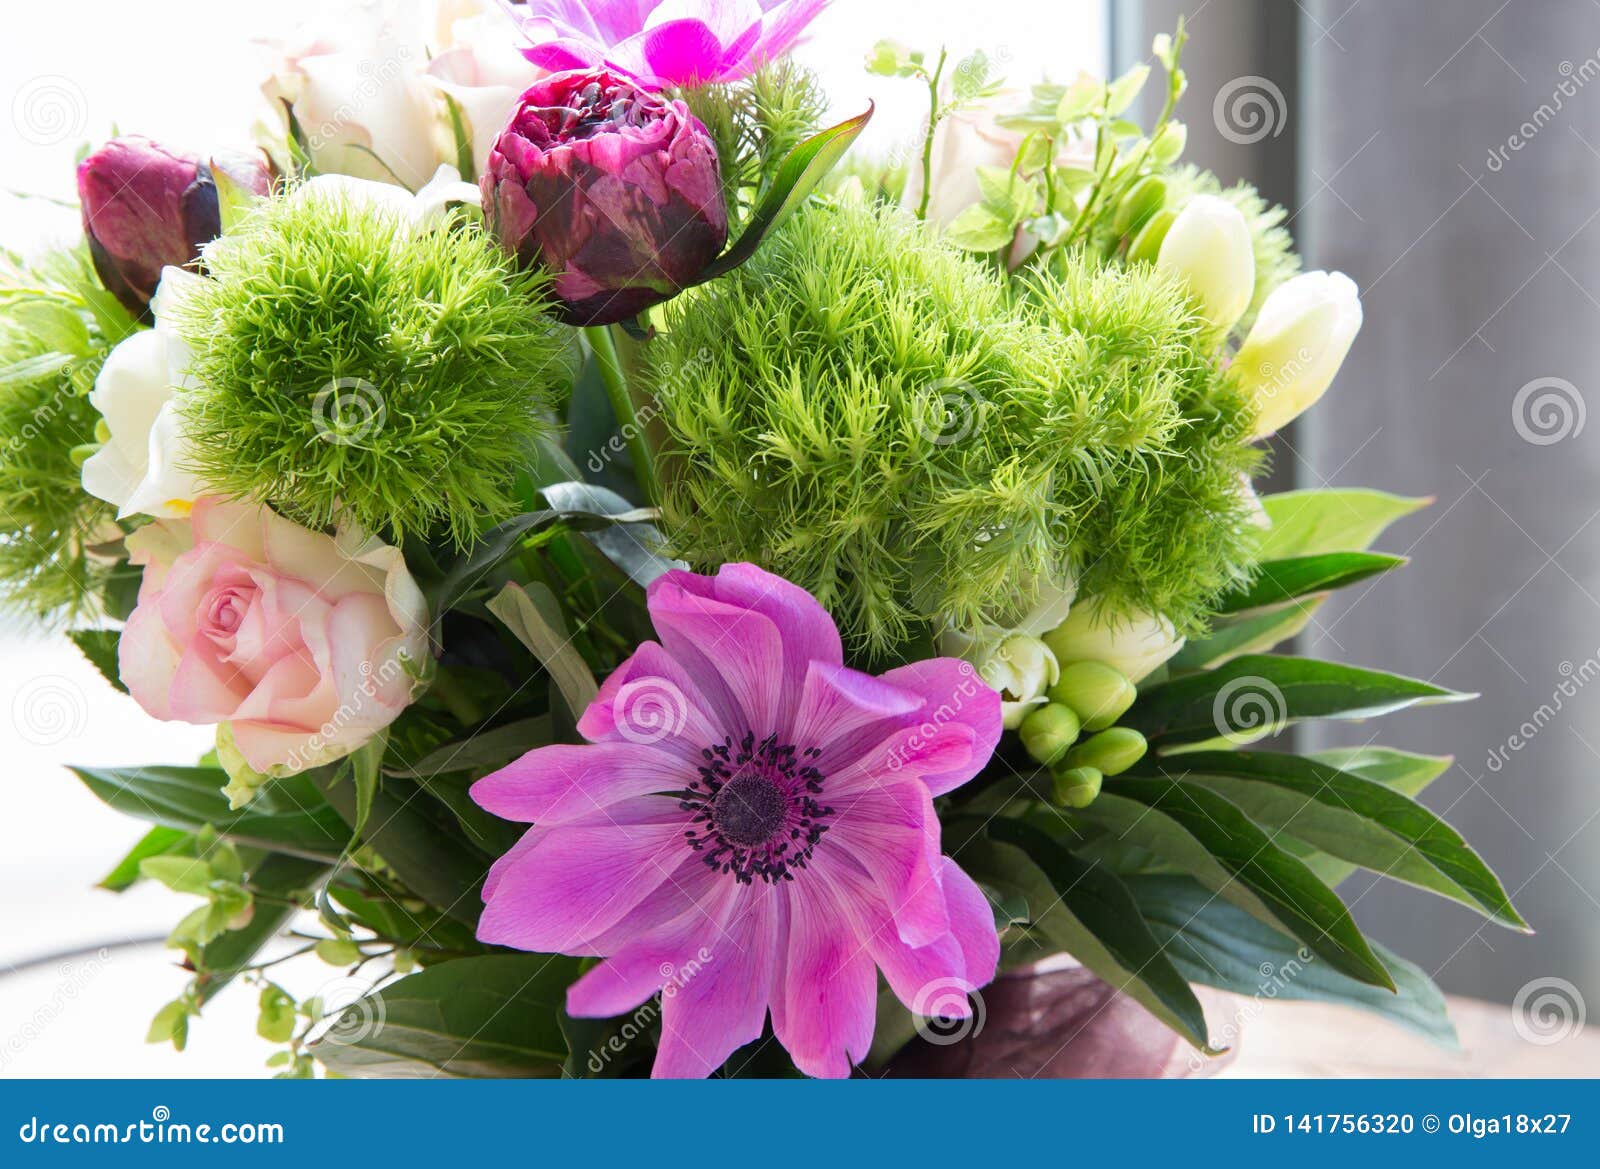 Beautiful Bouquet of Spring Flower in Vase Stock Photo - Image of ...